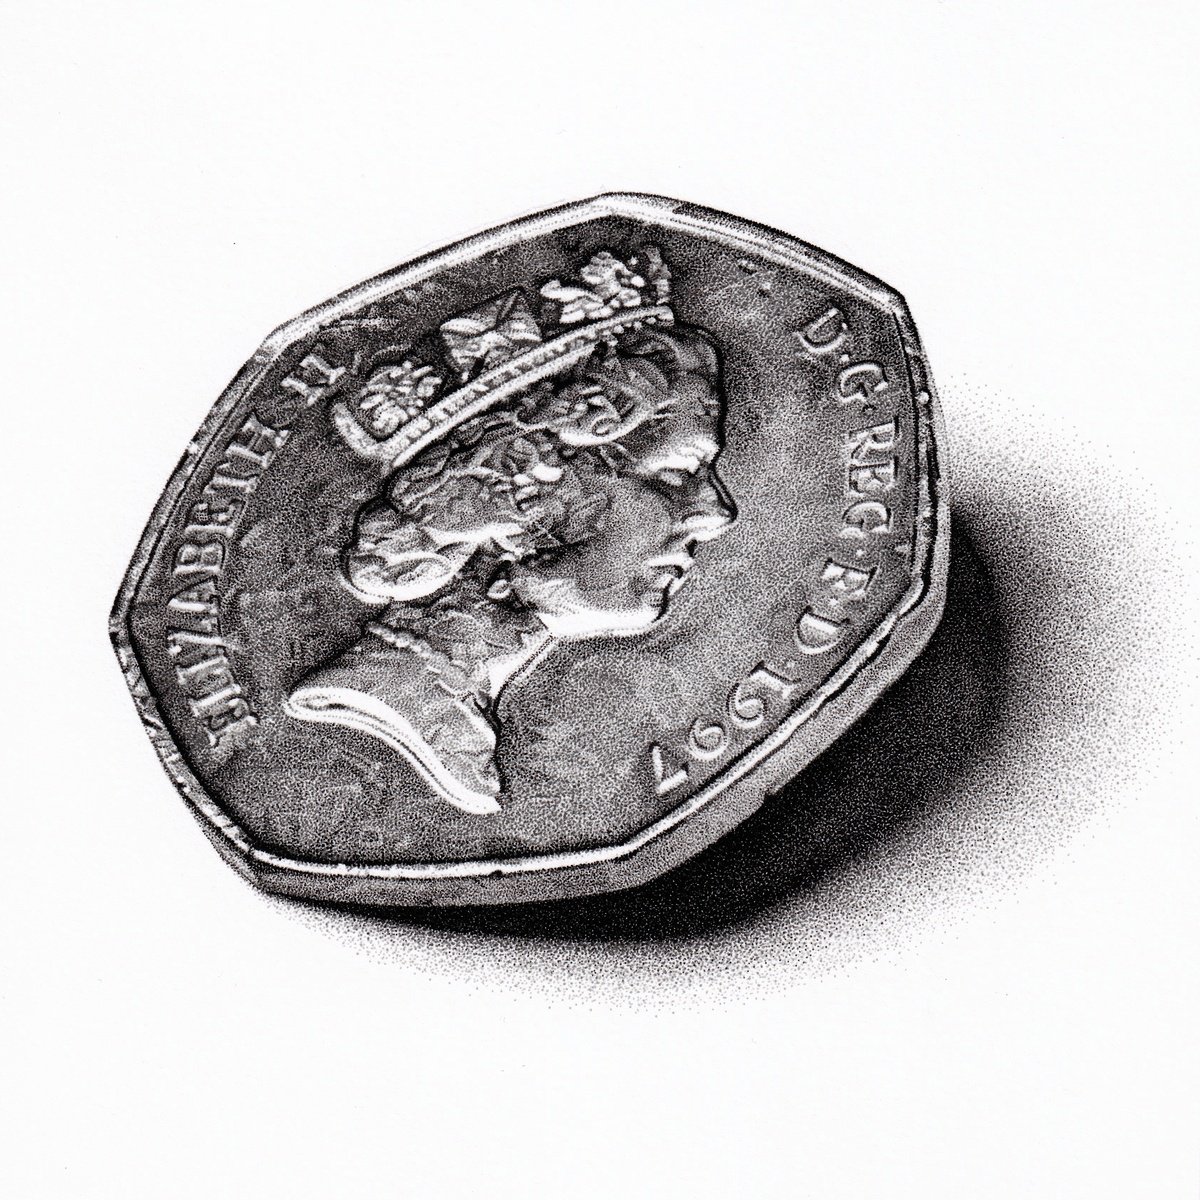 50 Pence Piece by Louis Savage